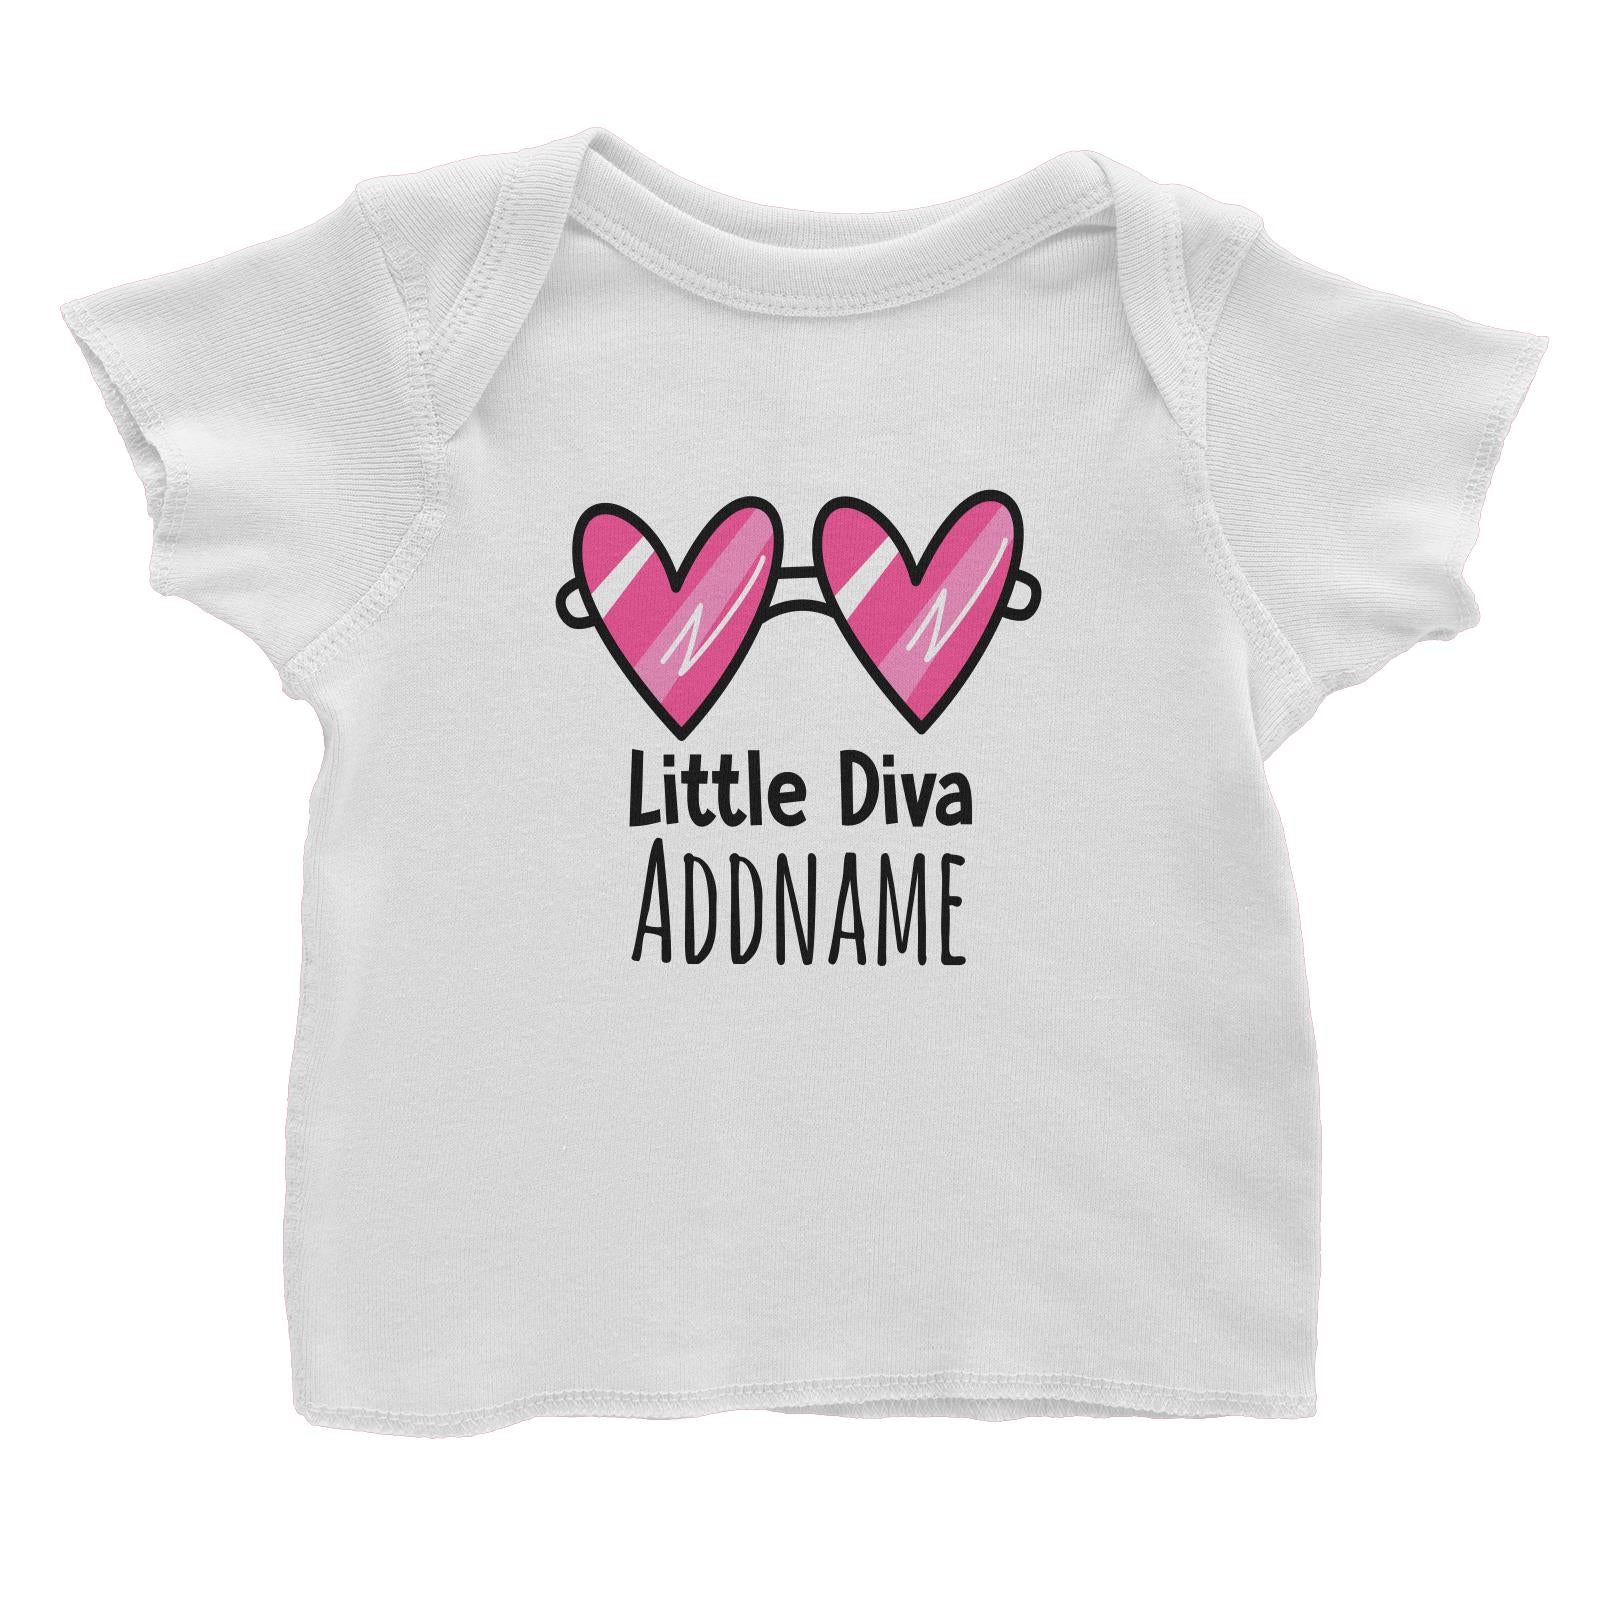 Drawn Baby Elements Little Diva Addname Baby T-Shirt